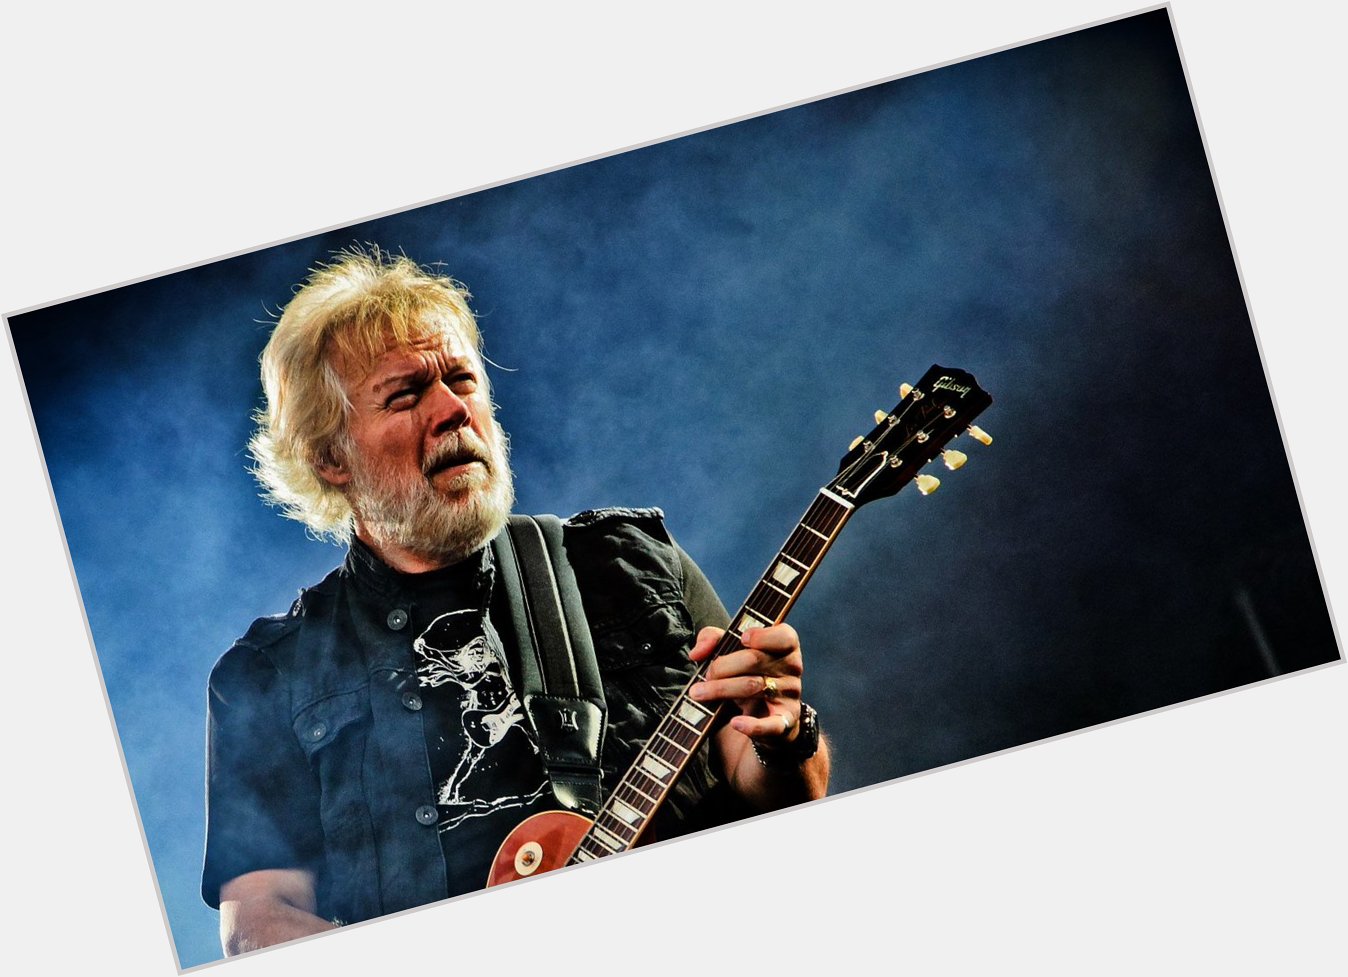      Taking care of business for 74 years. Happy Birthday Randy Bachman!  